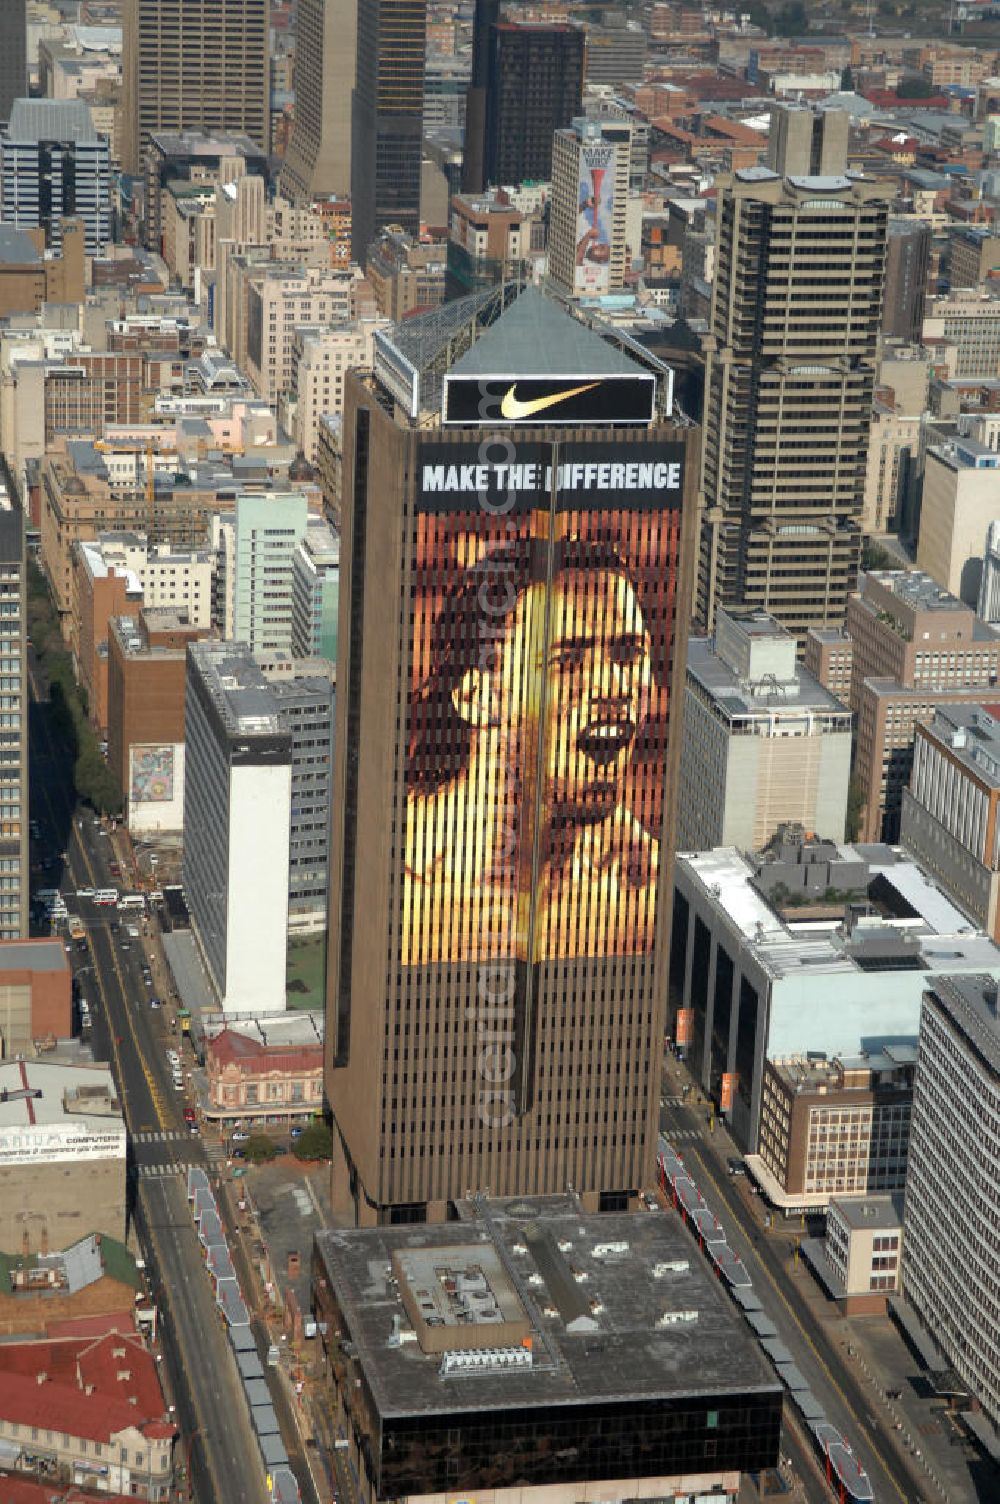 Aerial image JOHANNESBURG - Advertisement of the sports company Nike at the front of the Southern Life Center or African Eagle Life Centre in Johannesburg, South Africa. The skyscraper serves as an office and commercial building